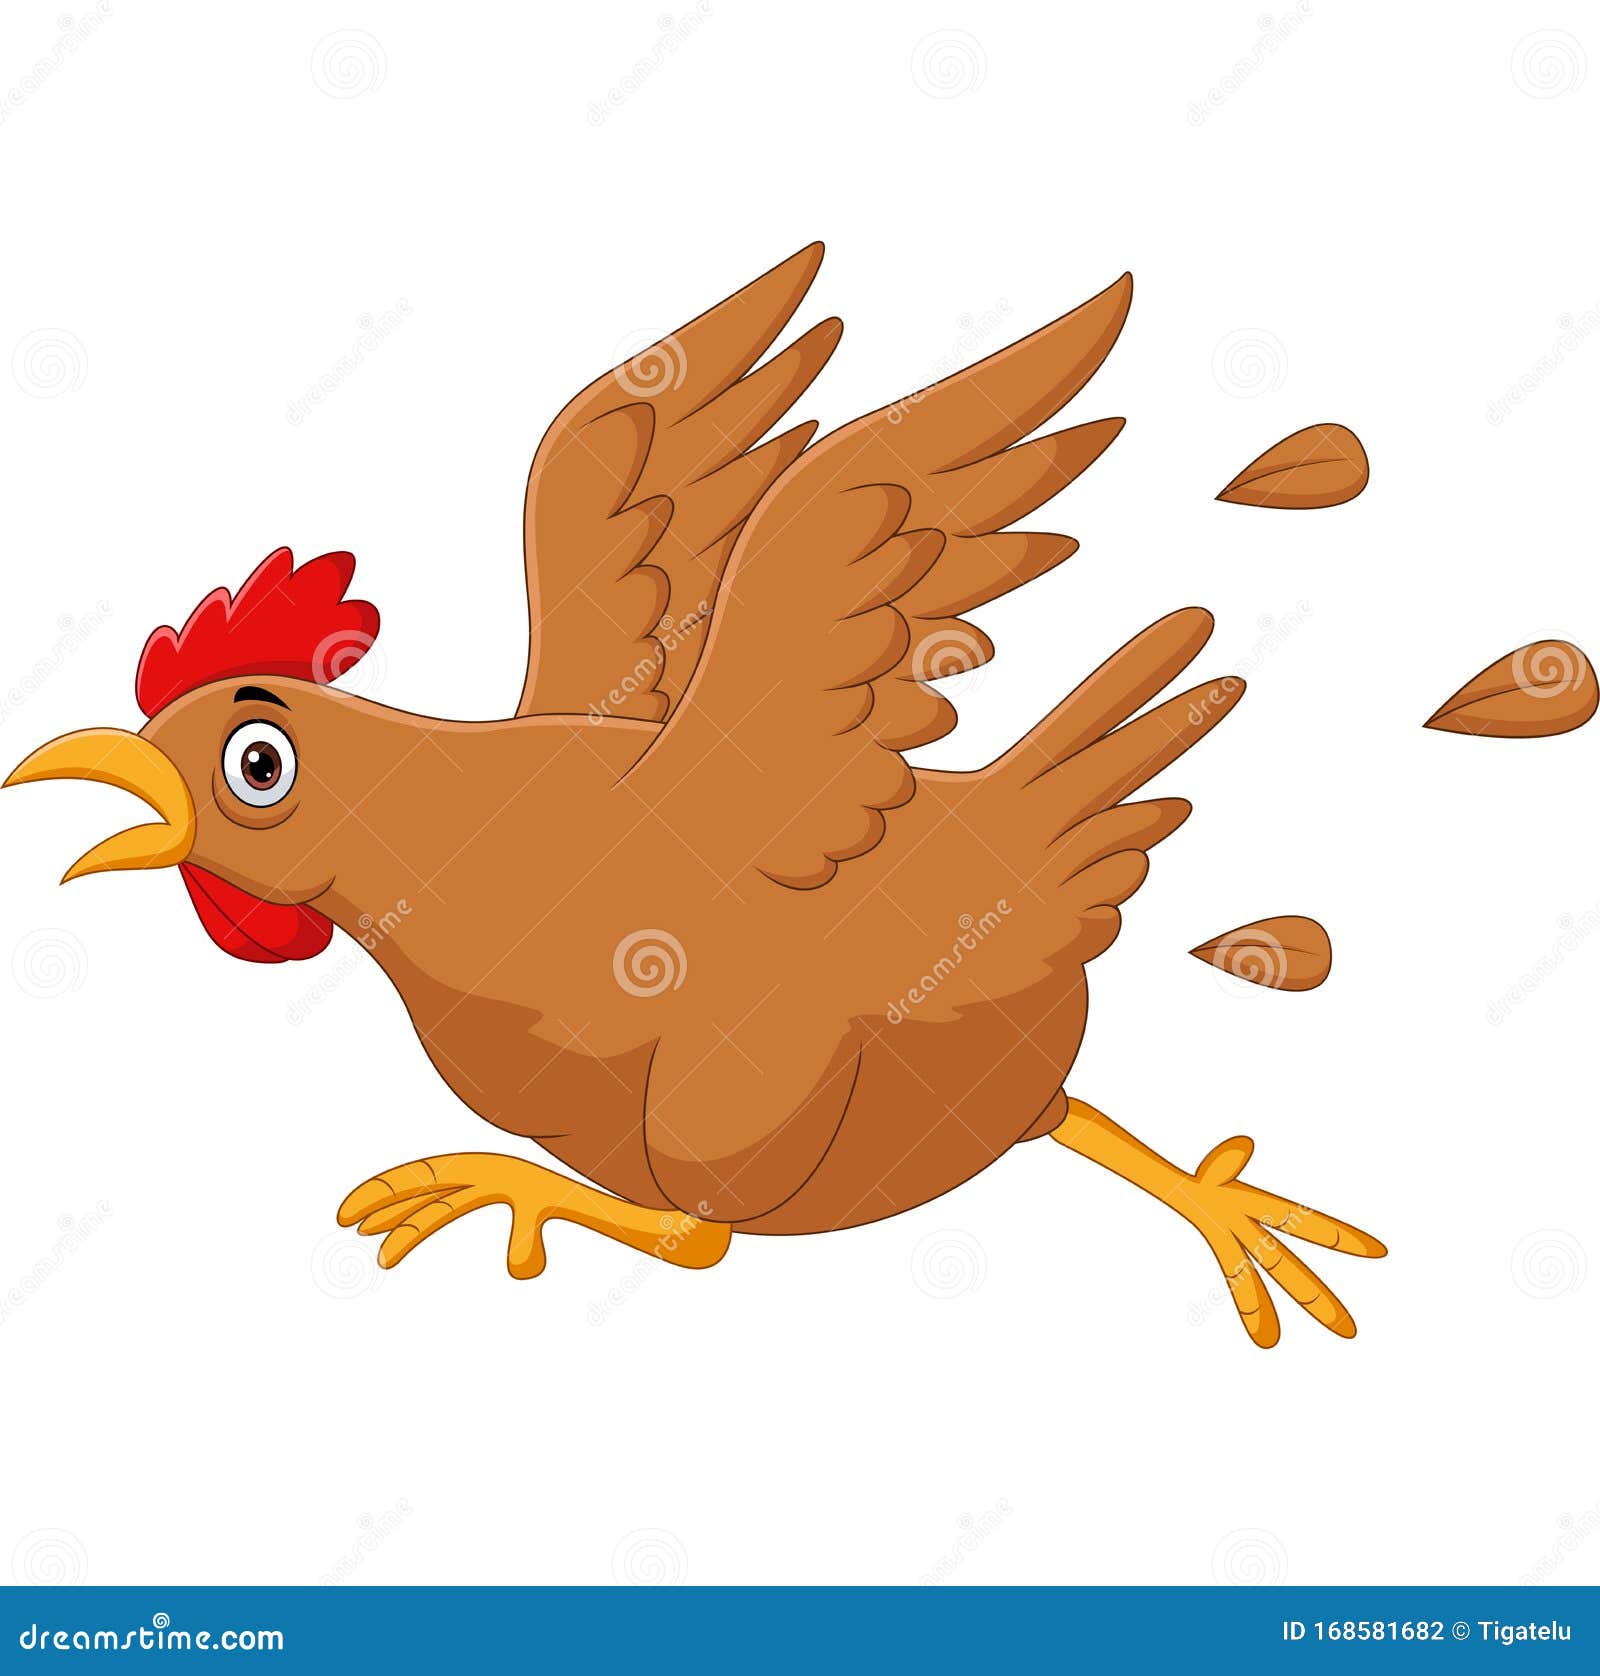 Scared Funny Cartoon Chicken Running Stock Vector - Illustration of male,  meat: 168581682